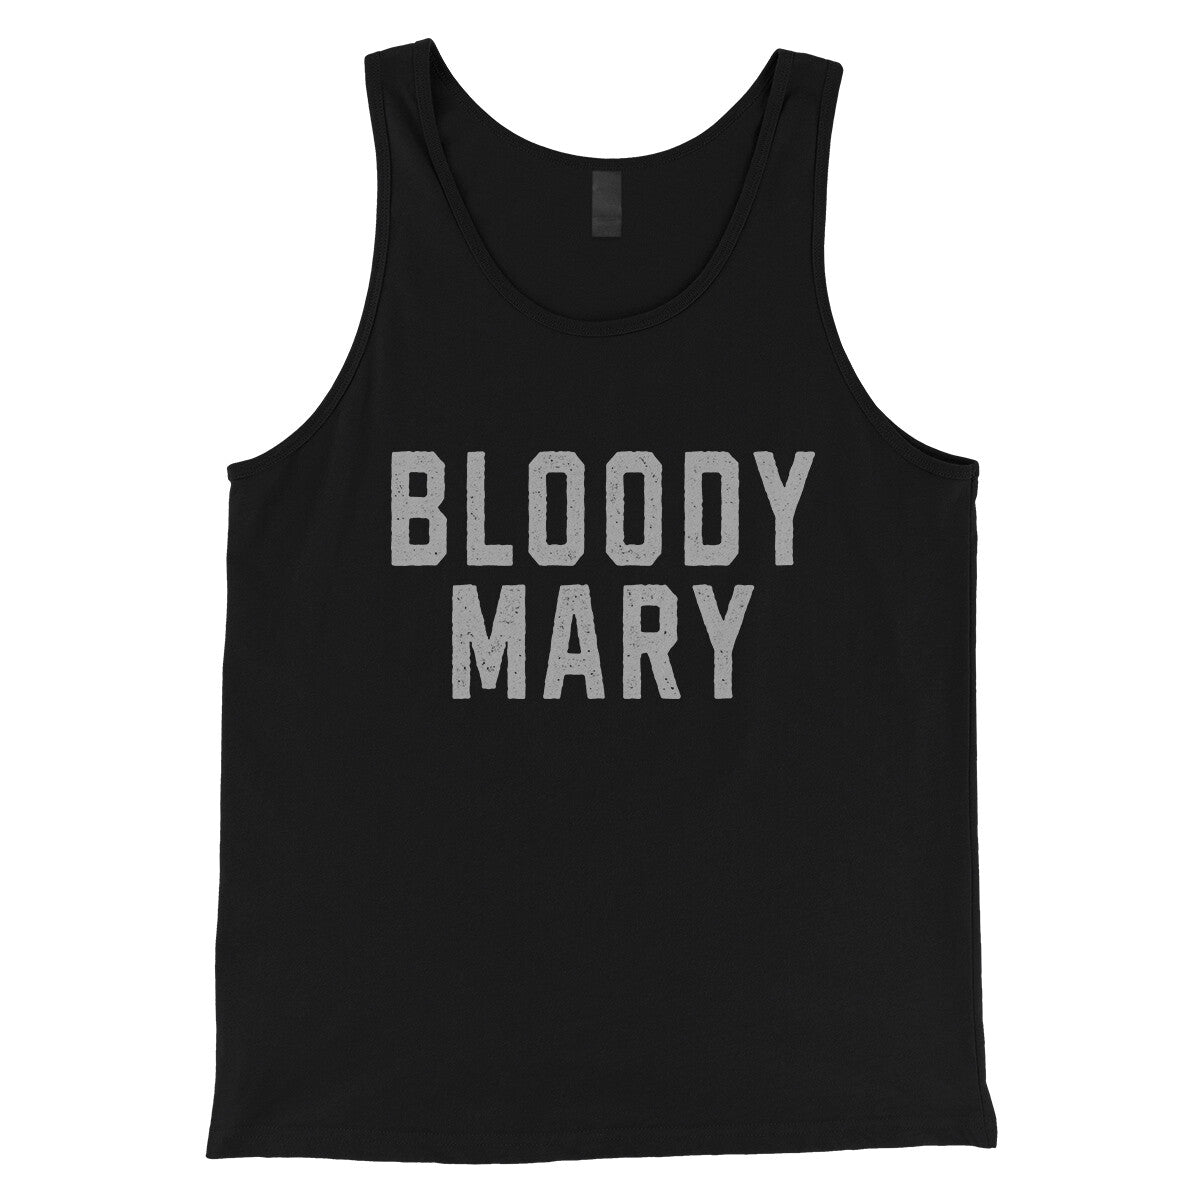 Bloody Mary in Black Color